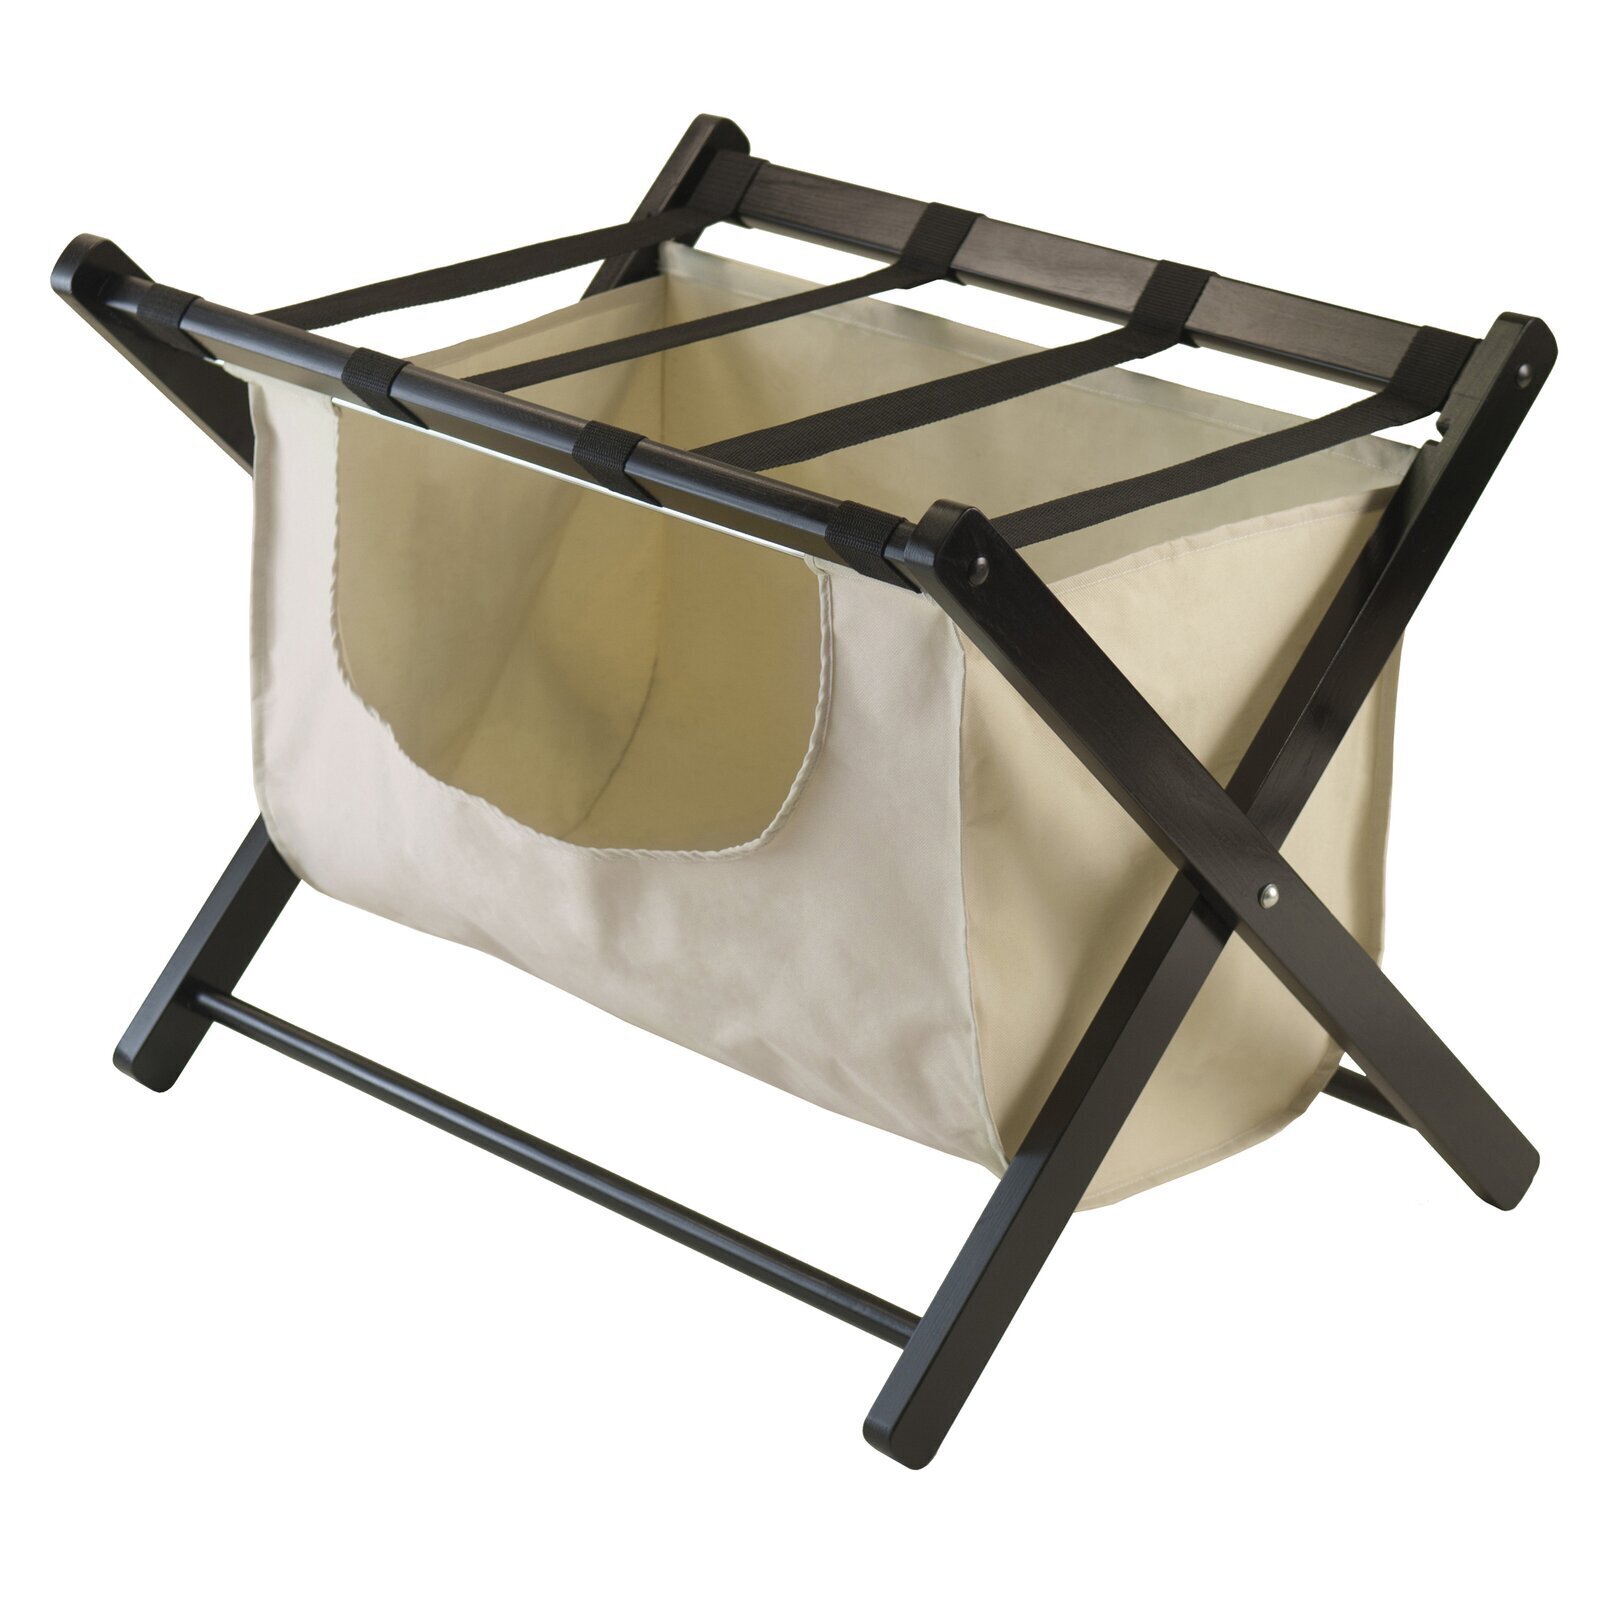 Small guest bedroom luggage rack with hanging bag